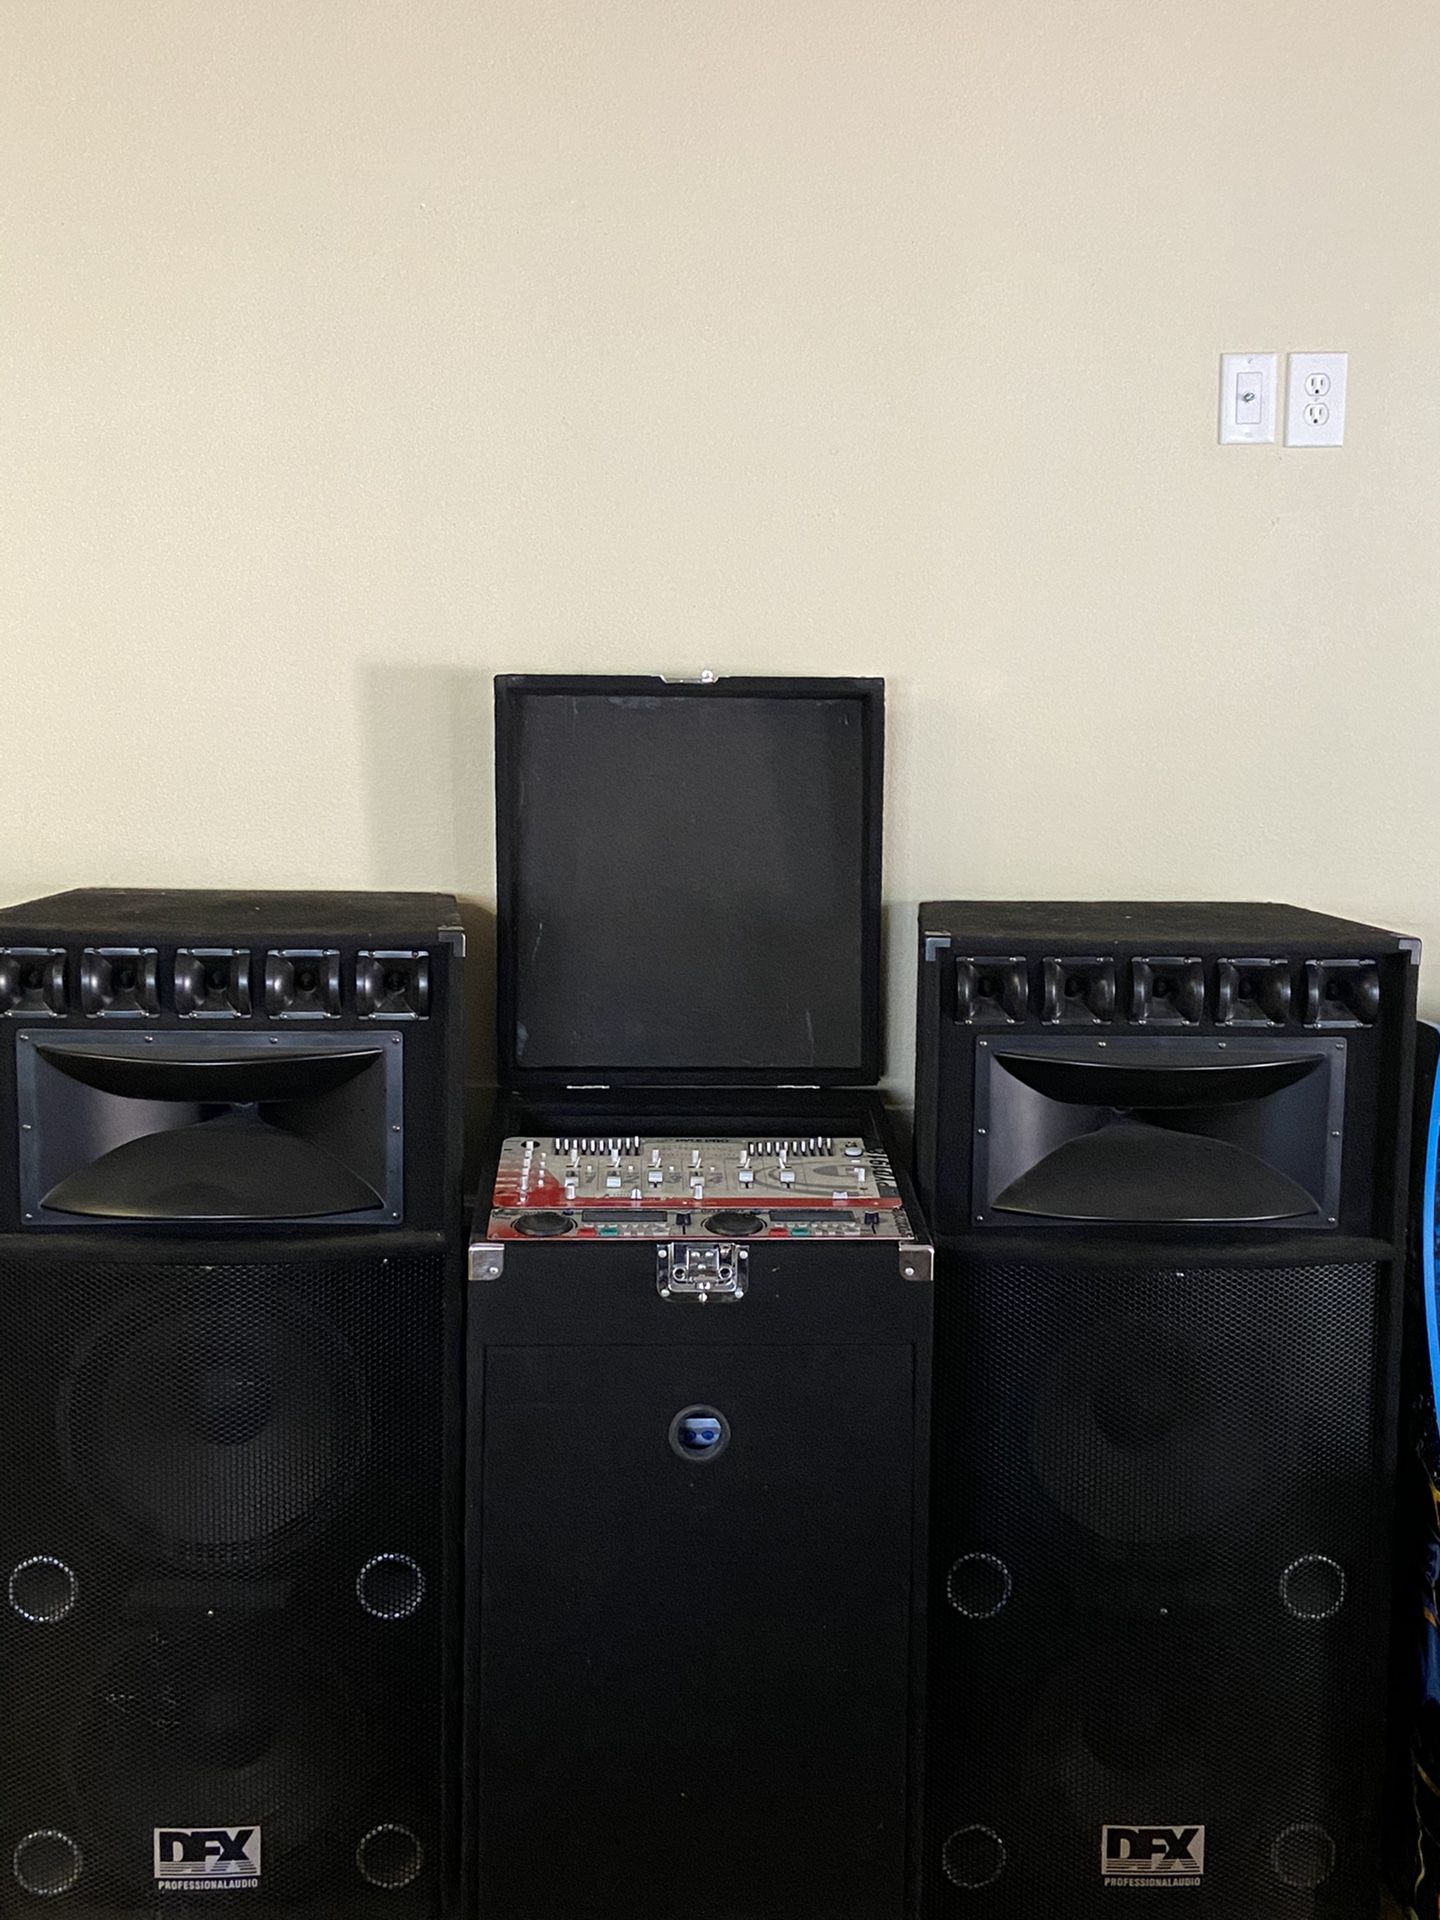 Pyle Pro PYD 918 with DFX profesional audio speakers